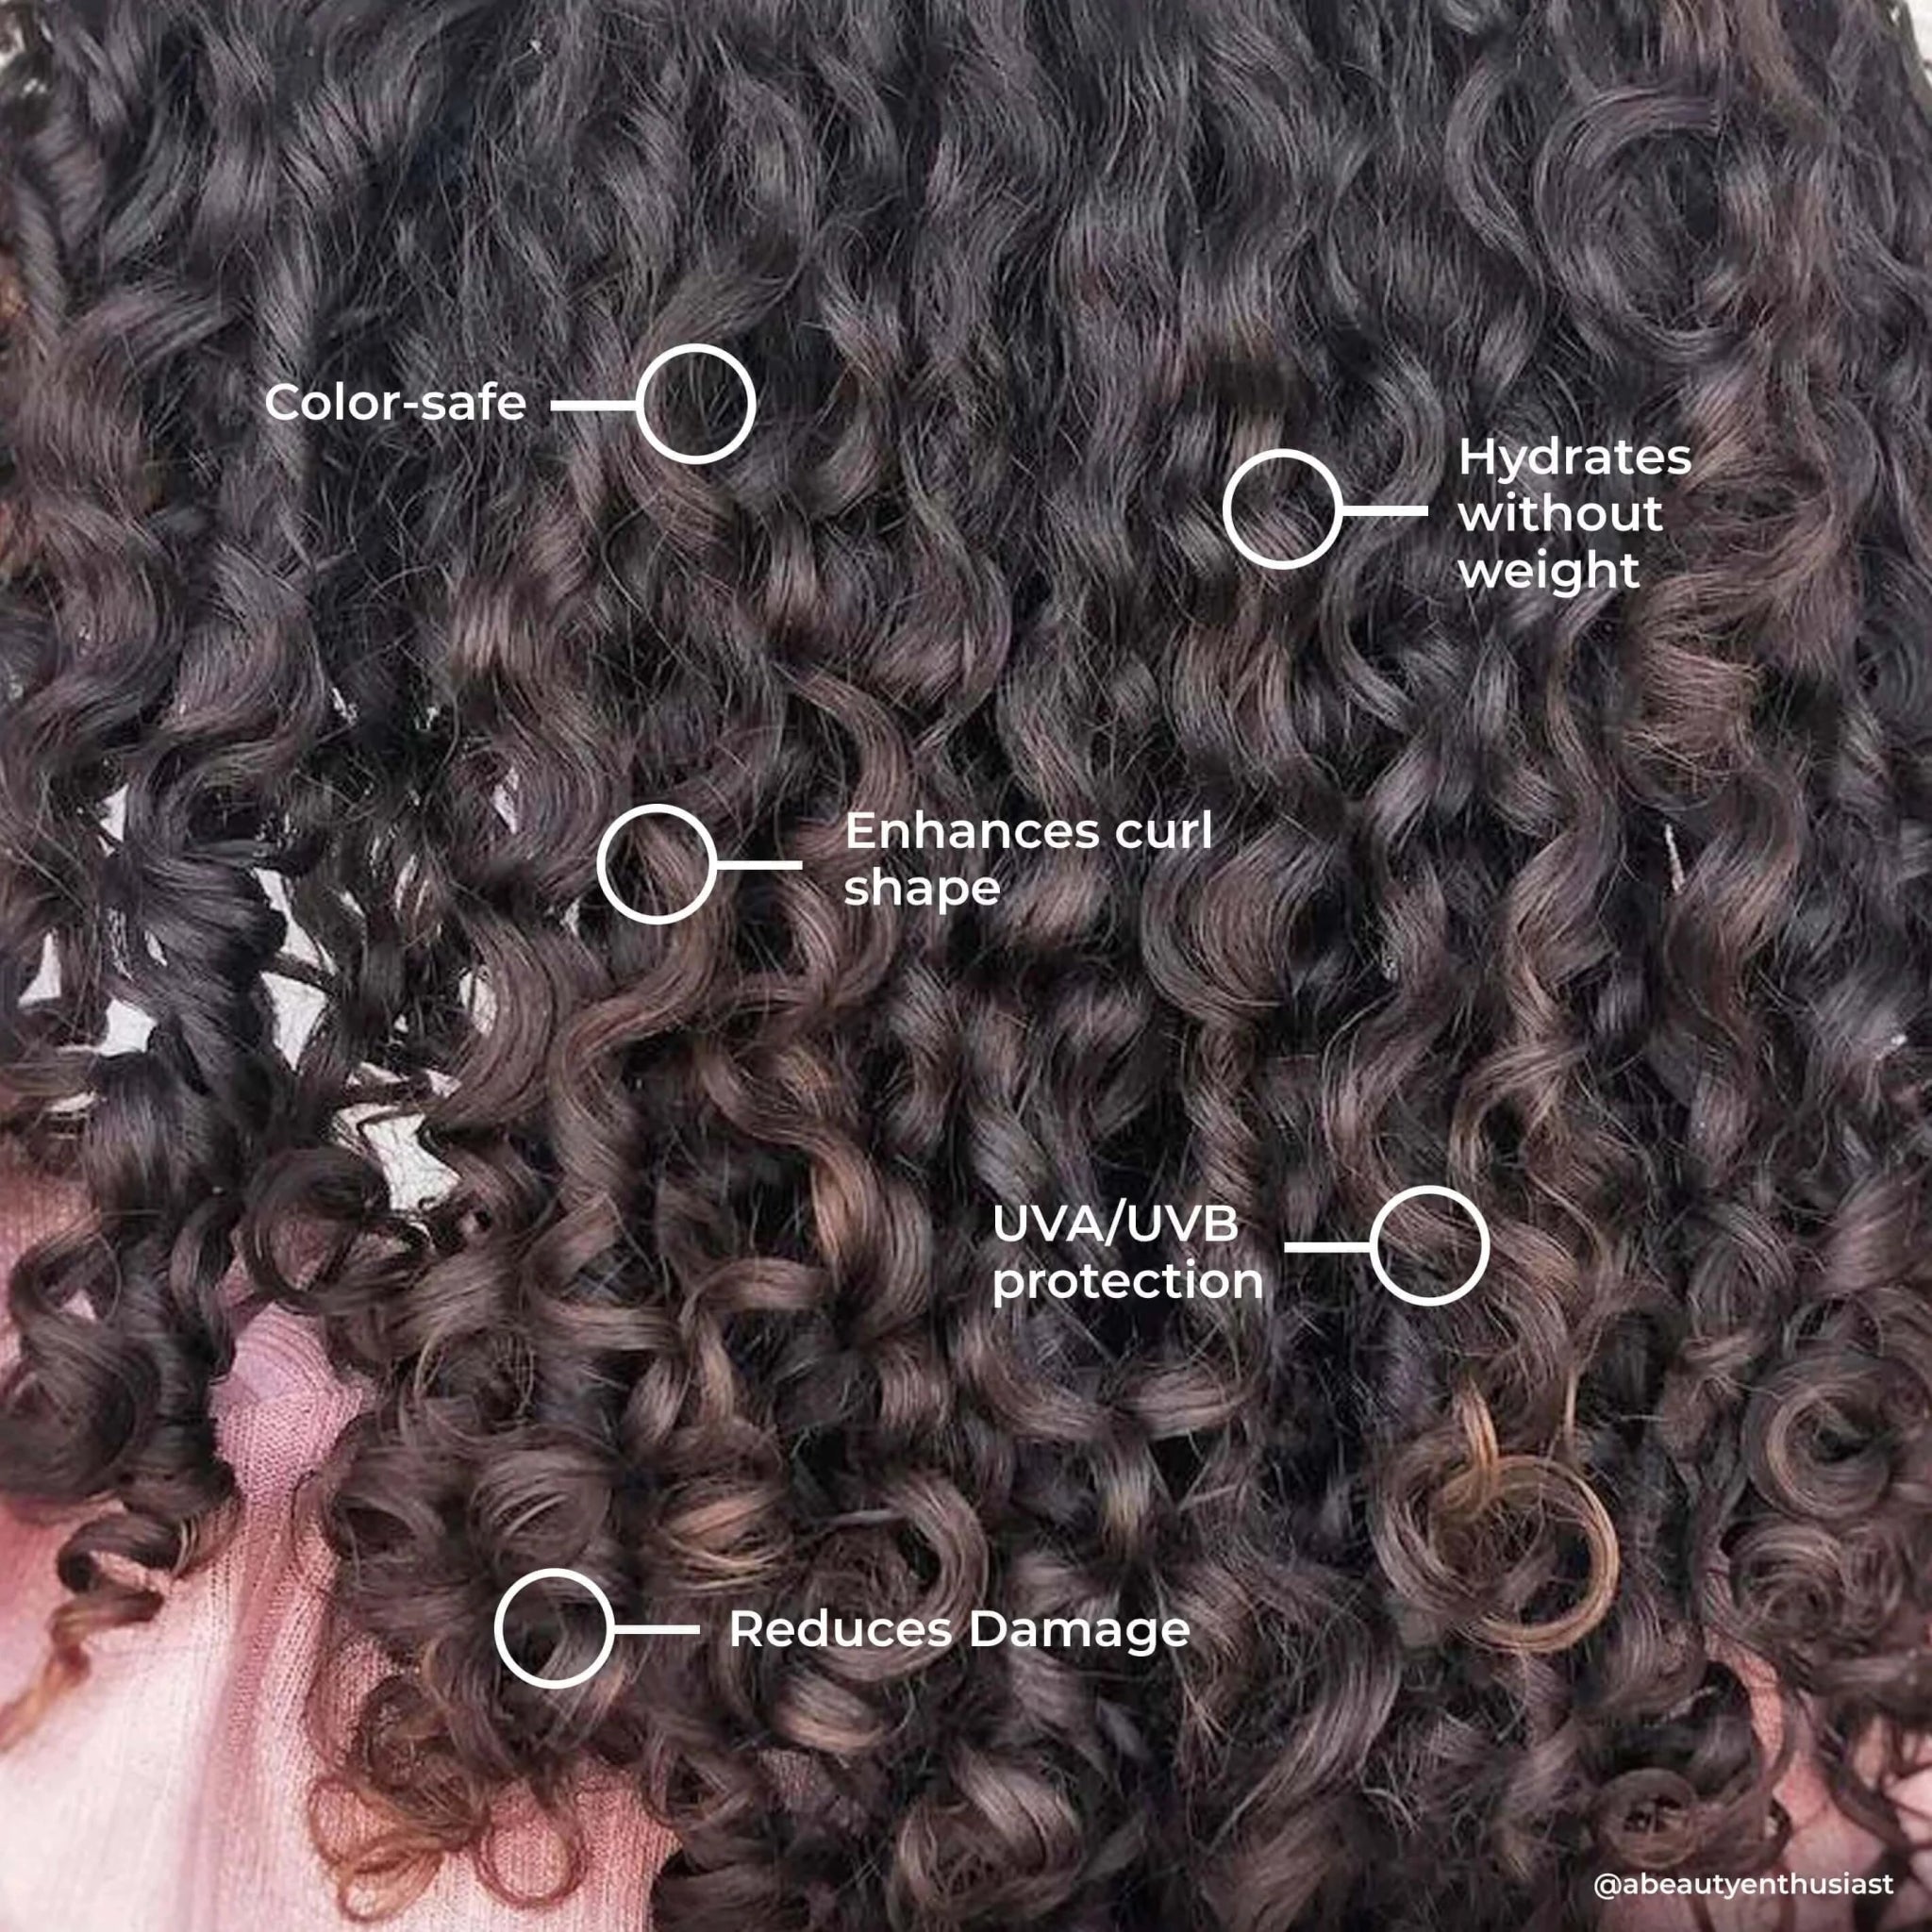 A close-up view of curly black hair showcasing the benefits of Leaf and Flower Instant Curl Repair Conditioner, including color-safety, moisture without heaviness, enhanced curl shape for various curl types, UV protection, and damage control.